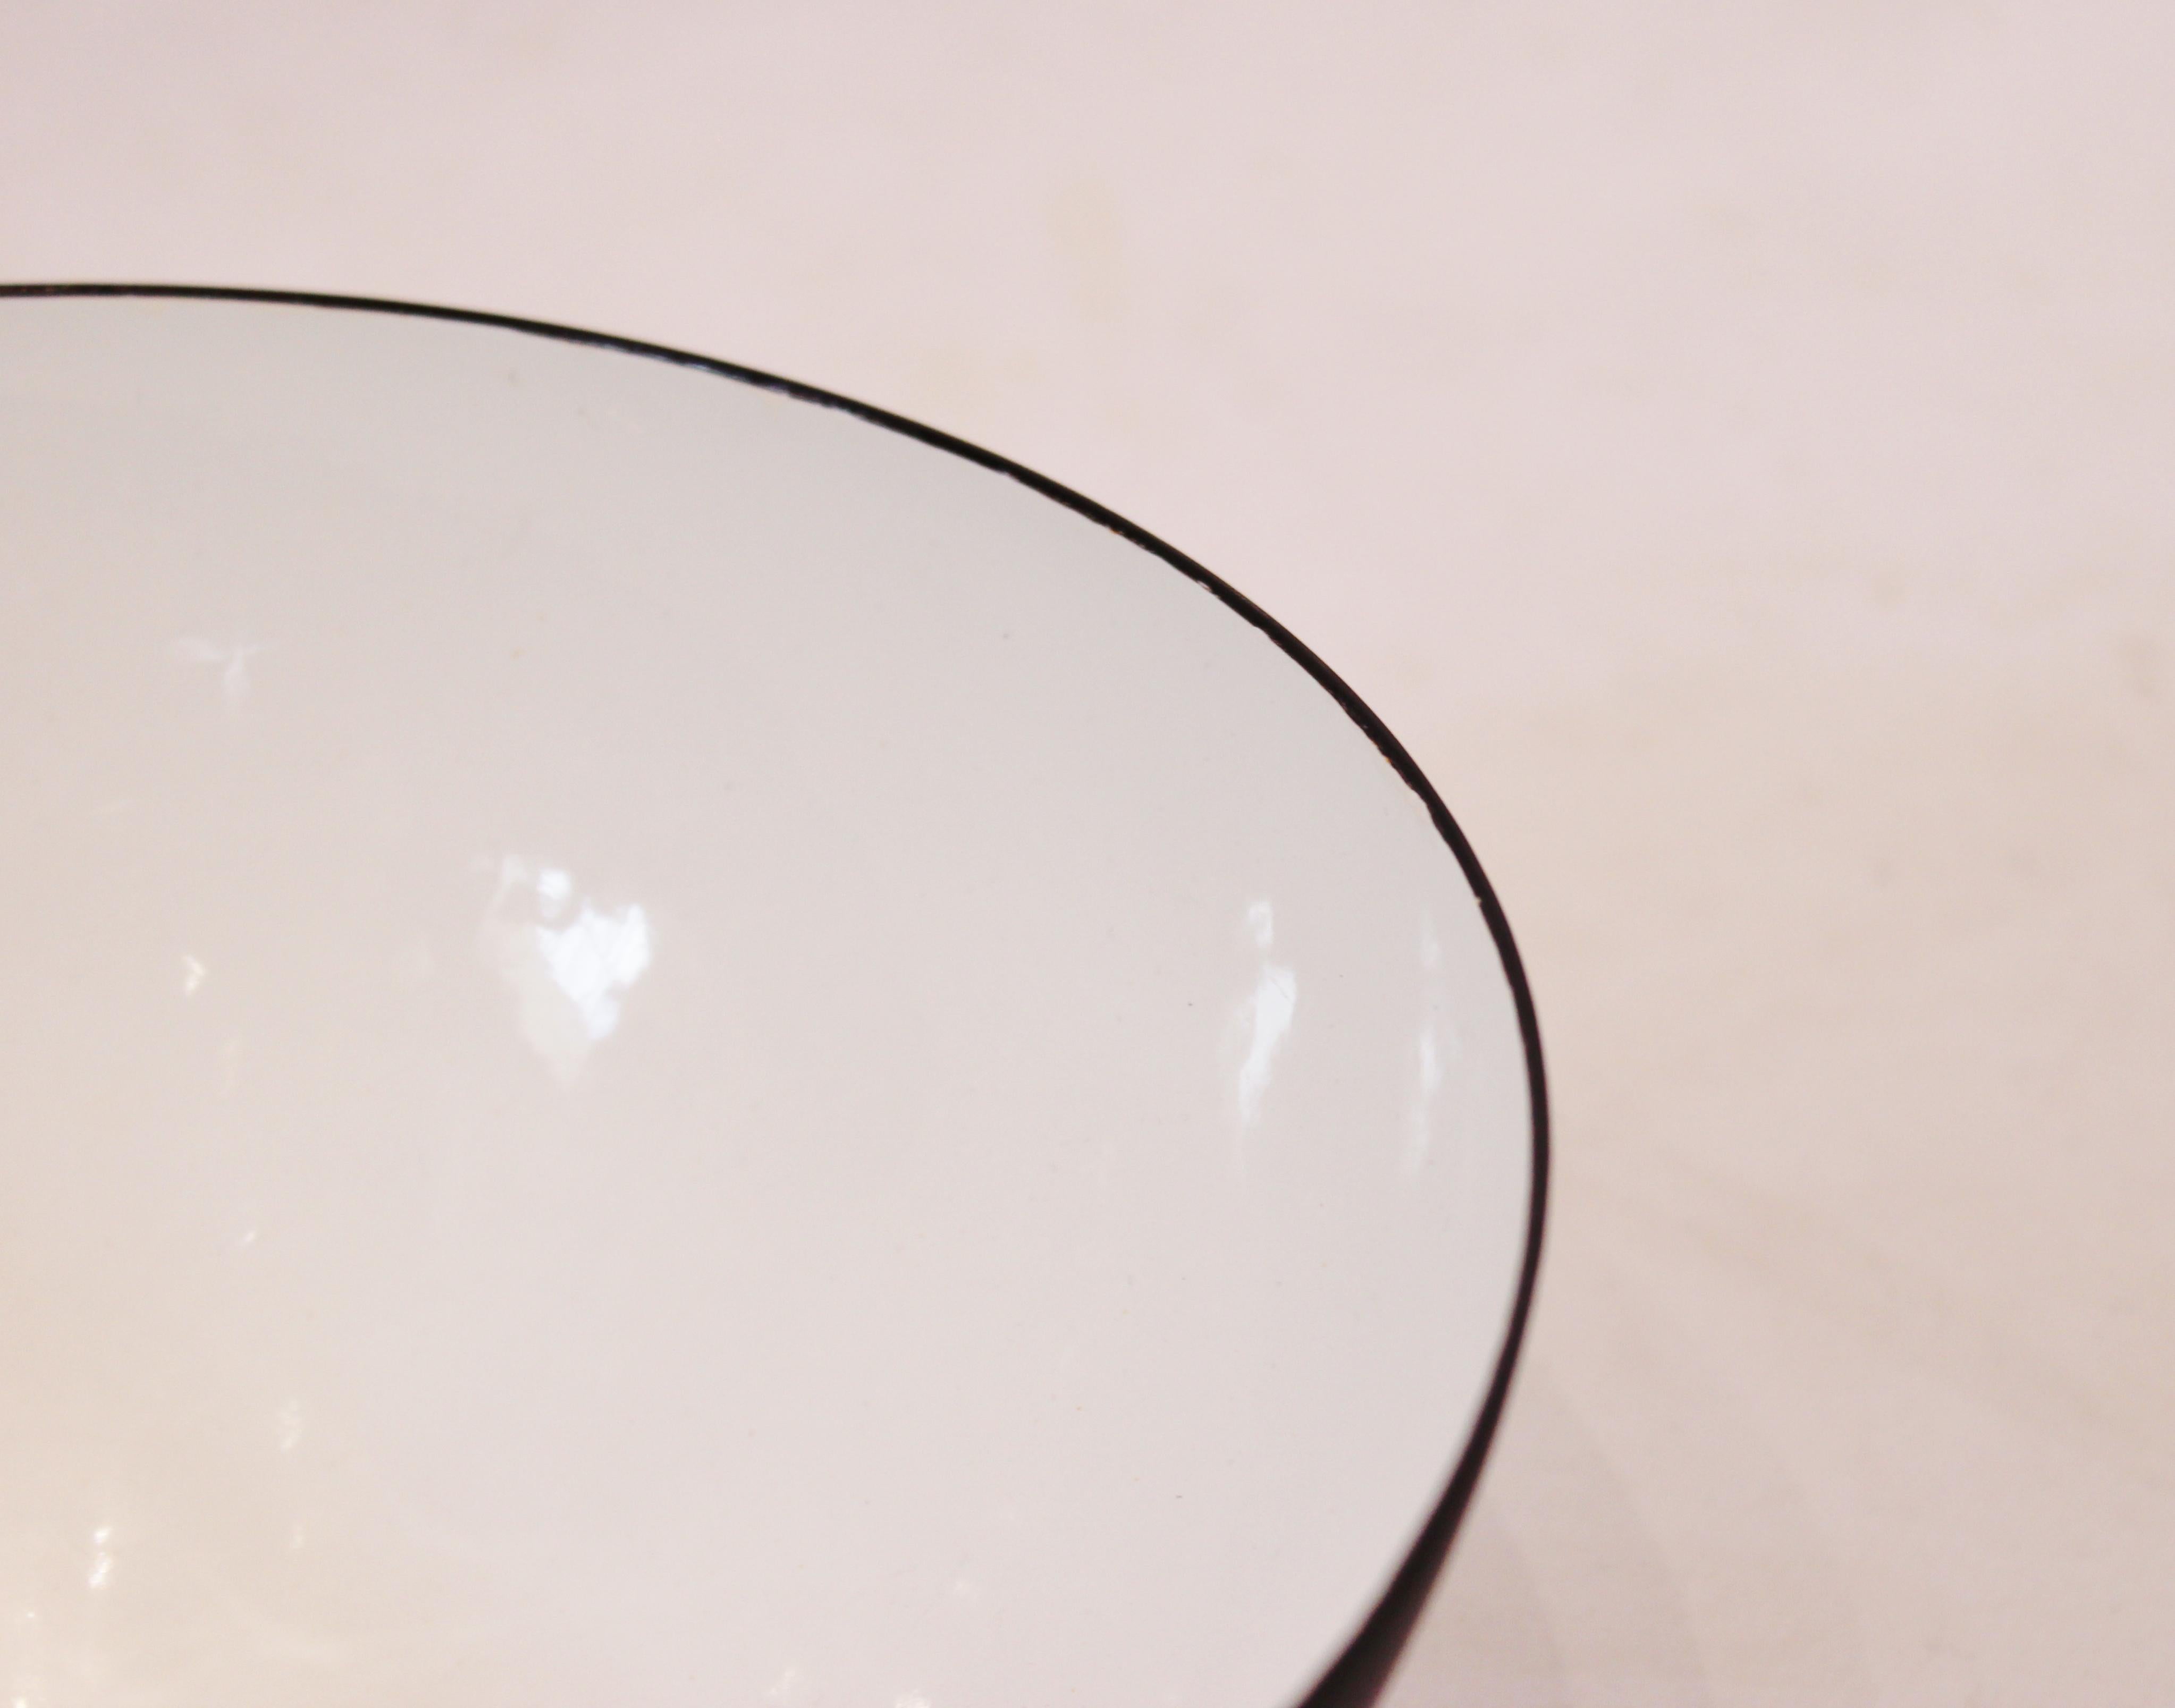 Krenit bowl by Herbert Krenchel from the 1960s. The bowl is of Danish design and great vintage condition. The item is decorated with black metal on the exterior and white enamel on the interior.